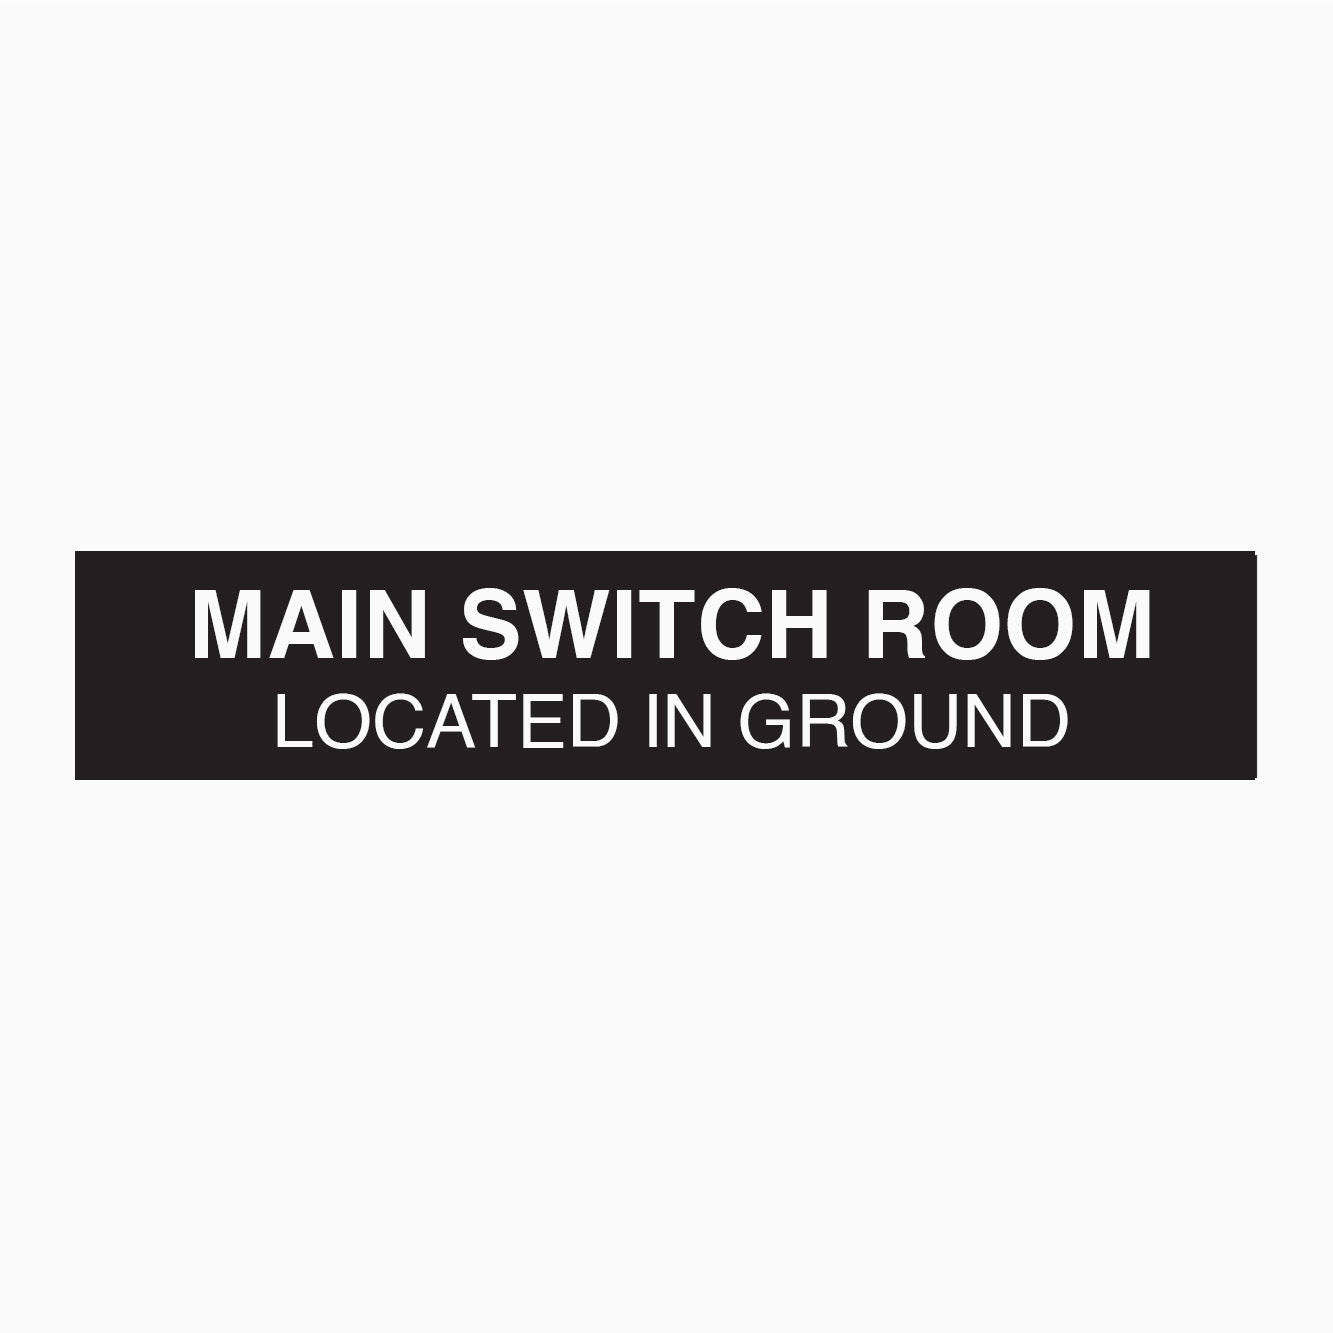 MAIN SWITCH ROOM LOCATED IN GROUND  SIGN